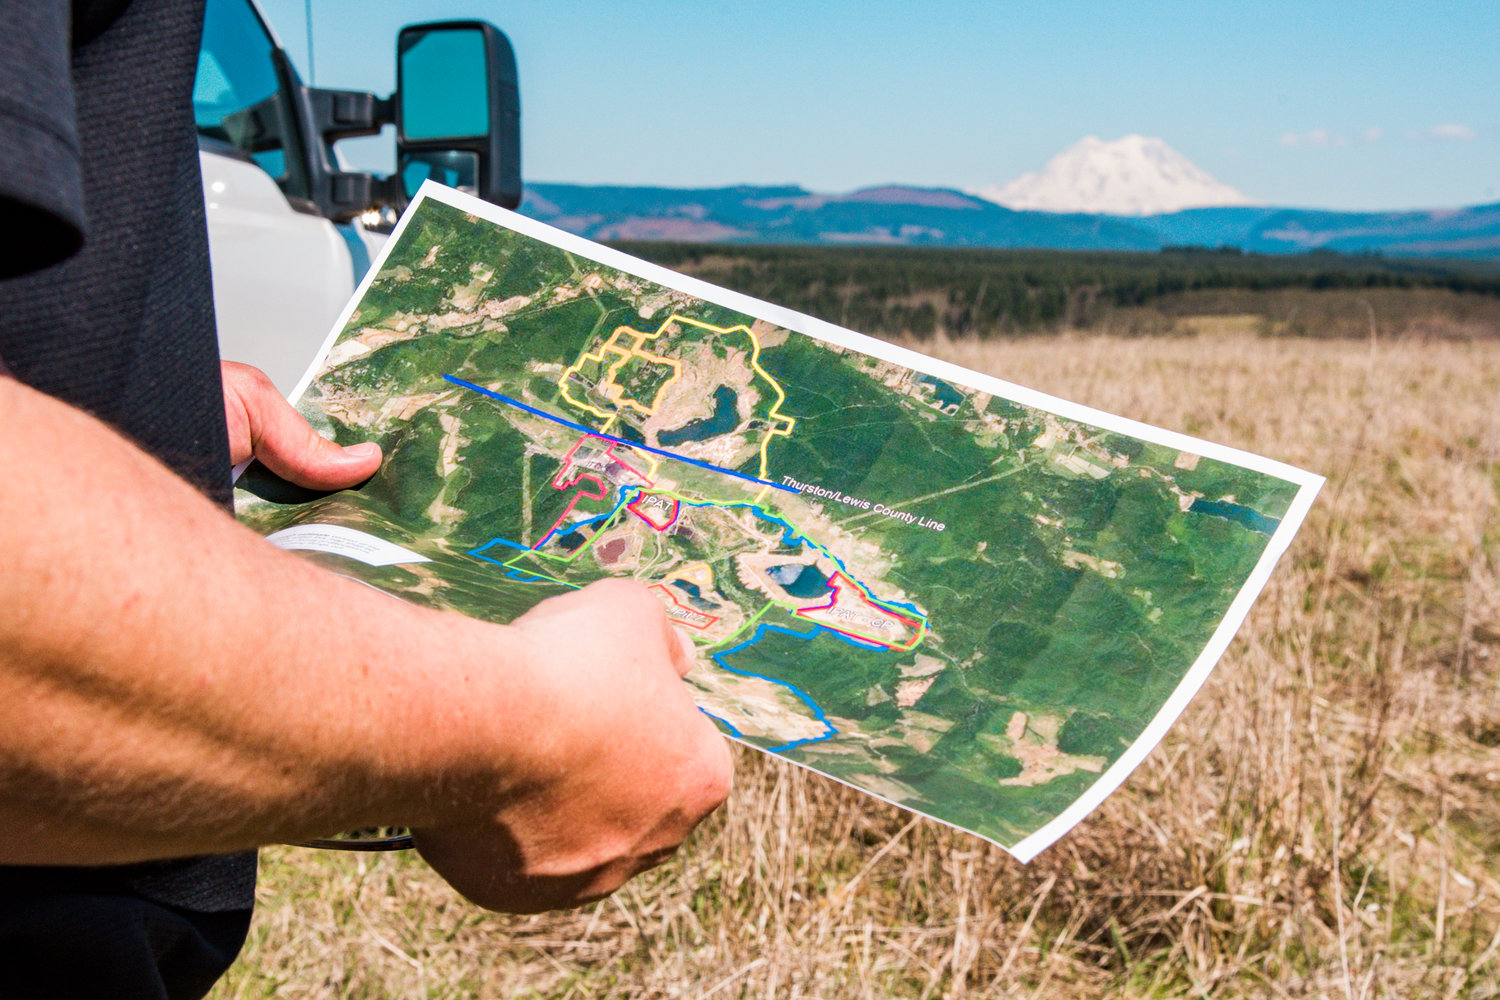 Cody Duncan holds up a map while overlooking TransAlta property near Centralia in April.